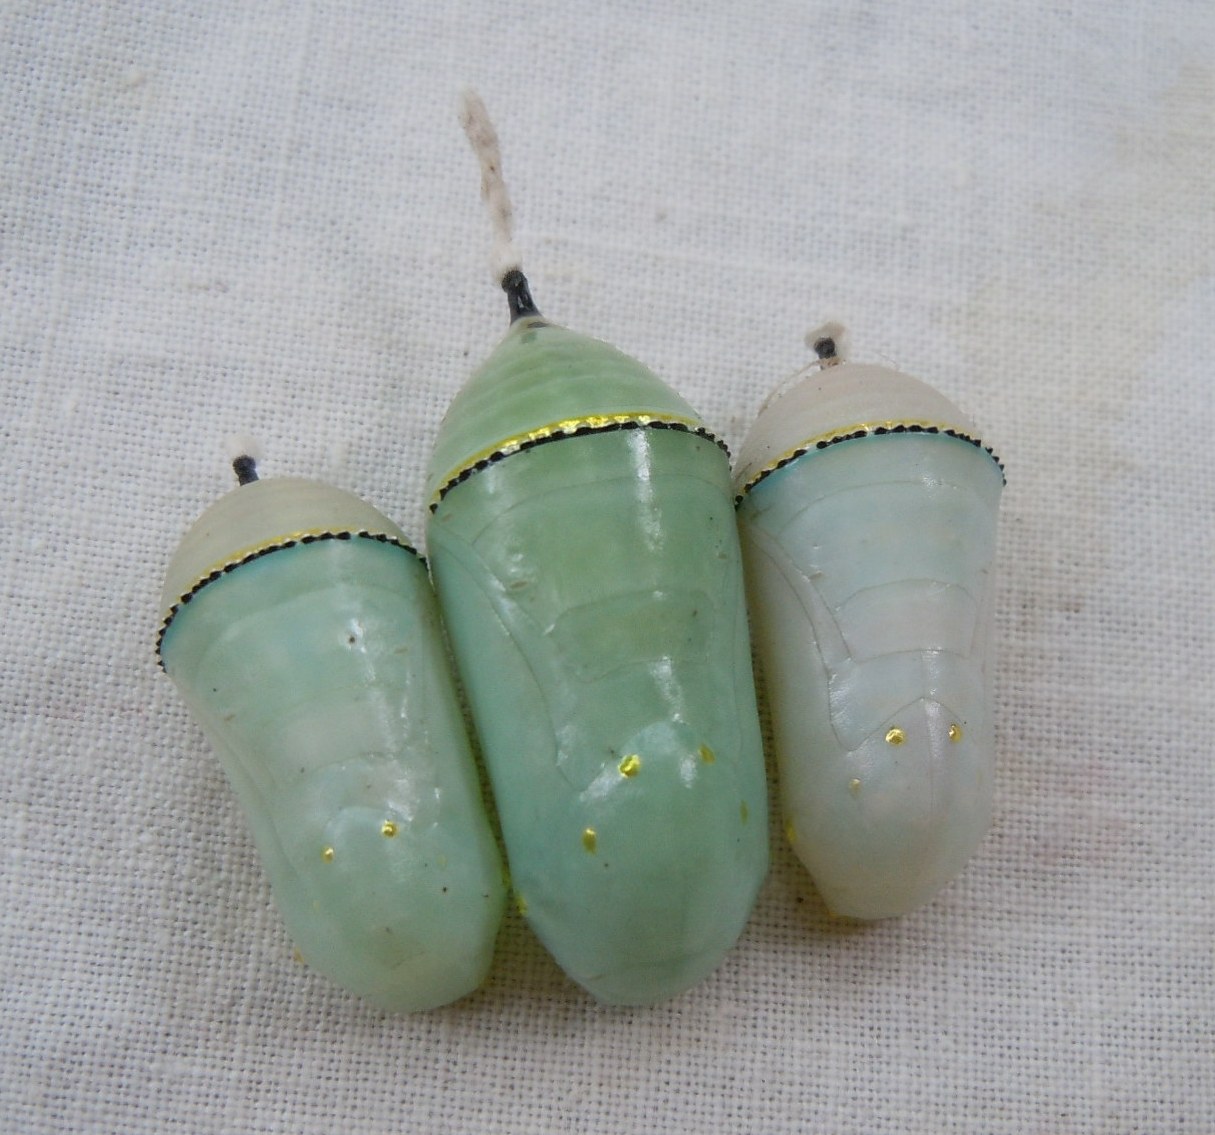 Queen and Monarch chrysalises